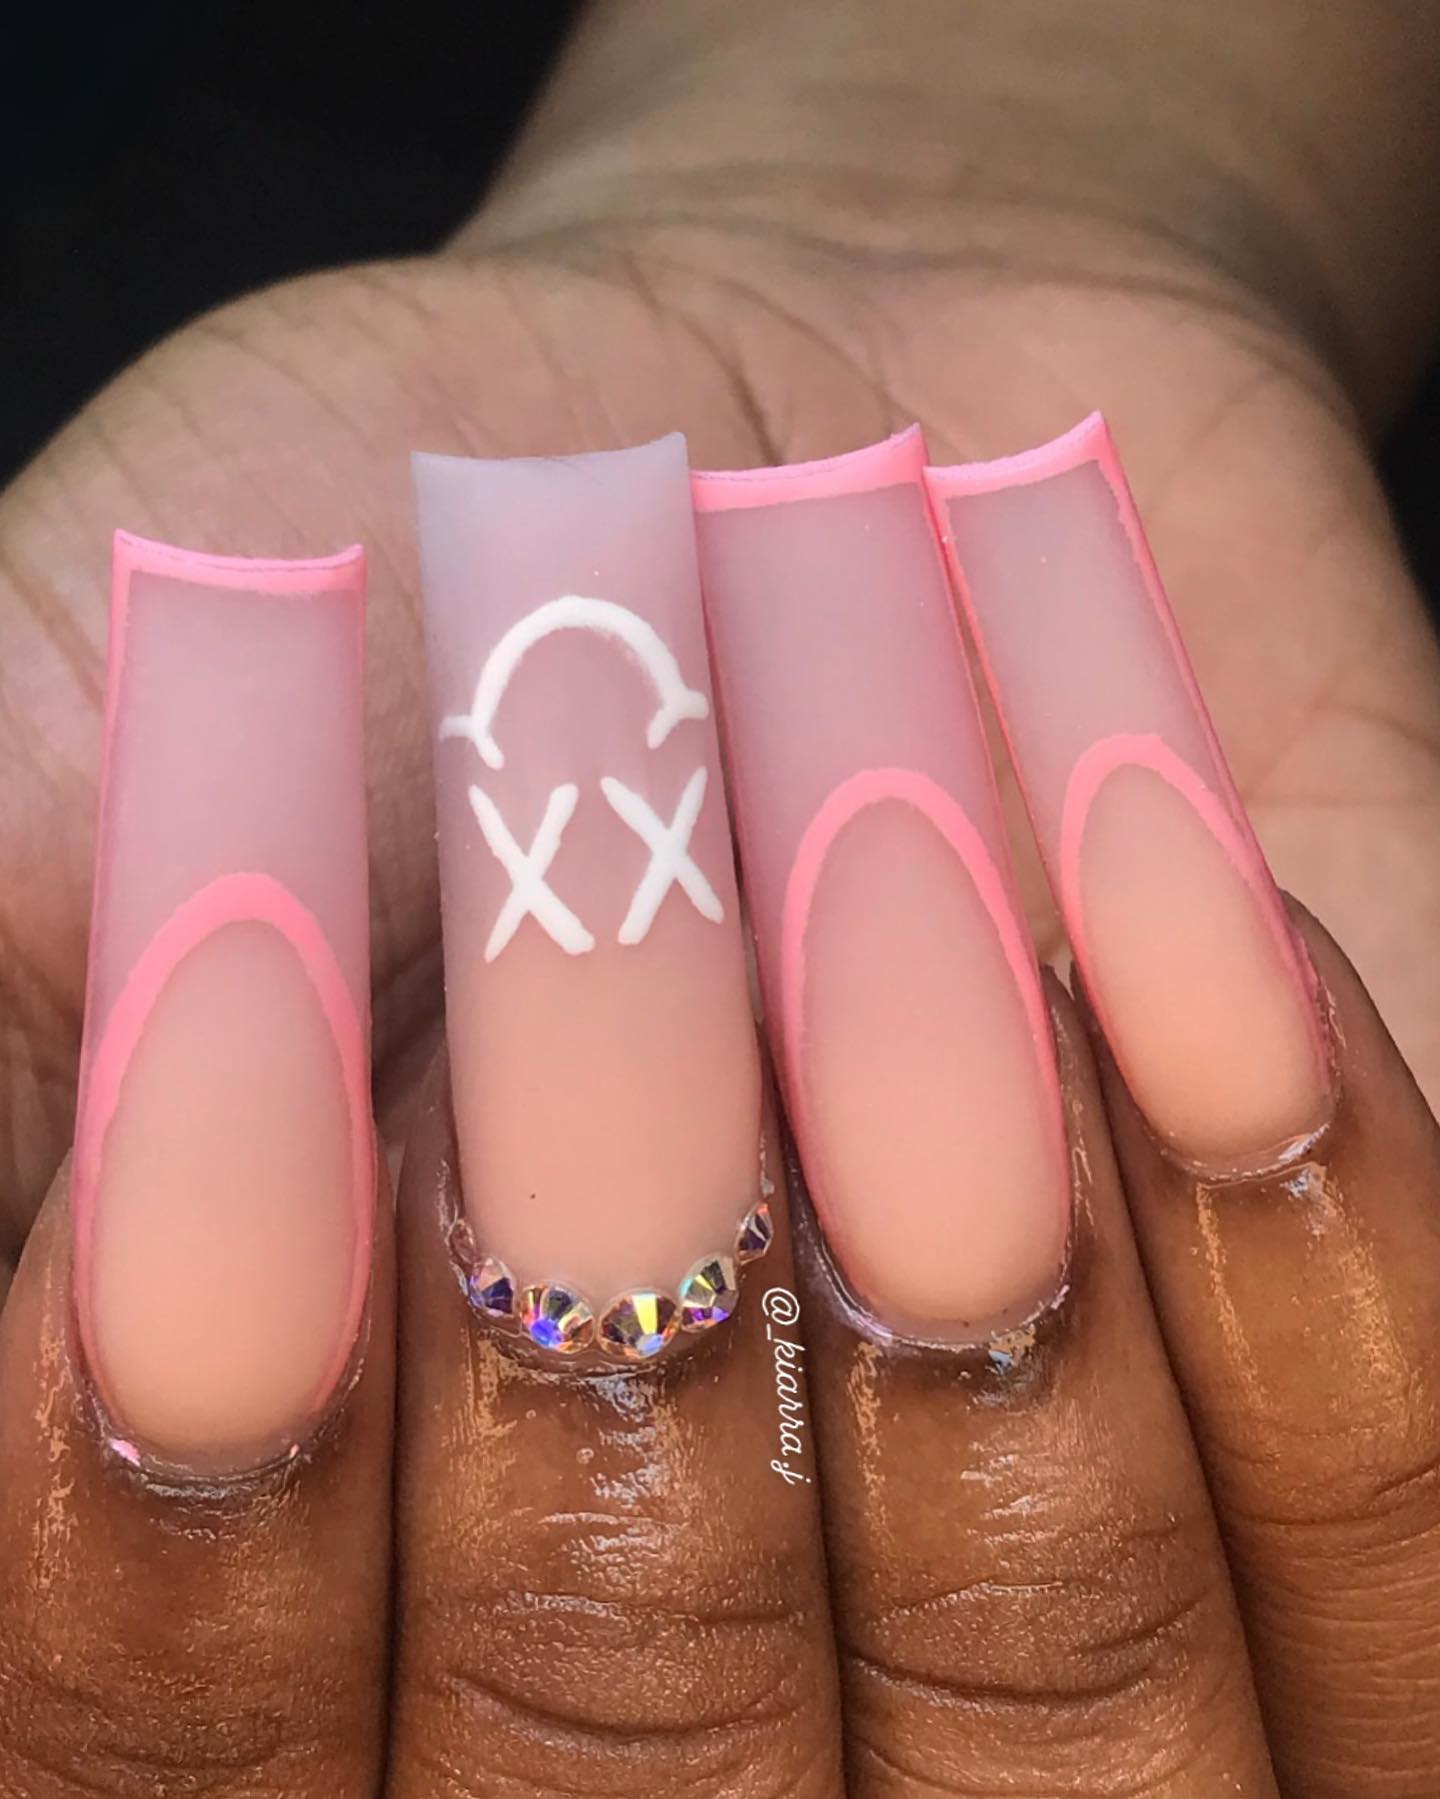 Matte pink nails can also be so fun and different. Want to give them a go?